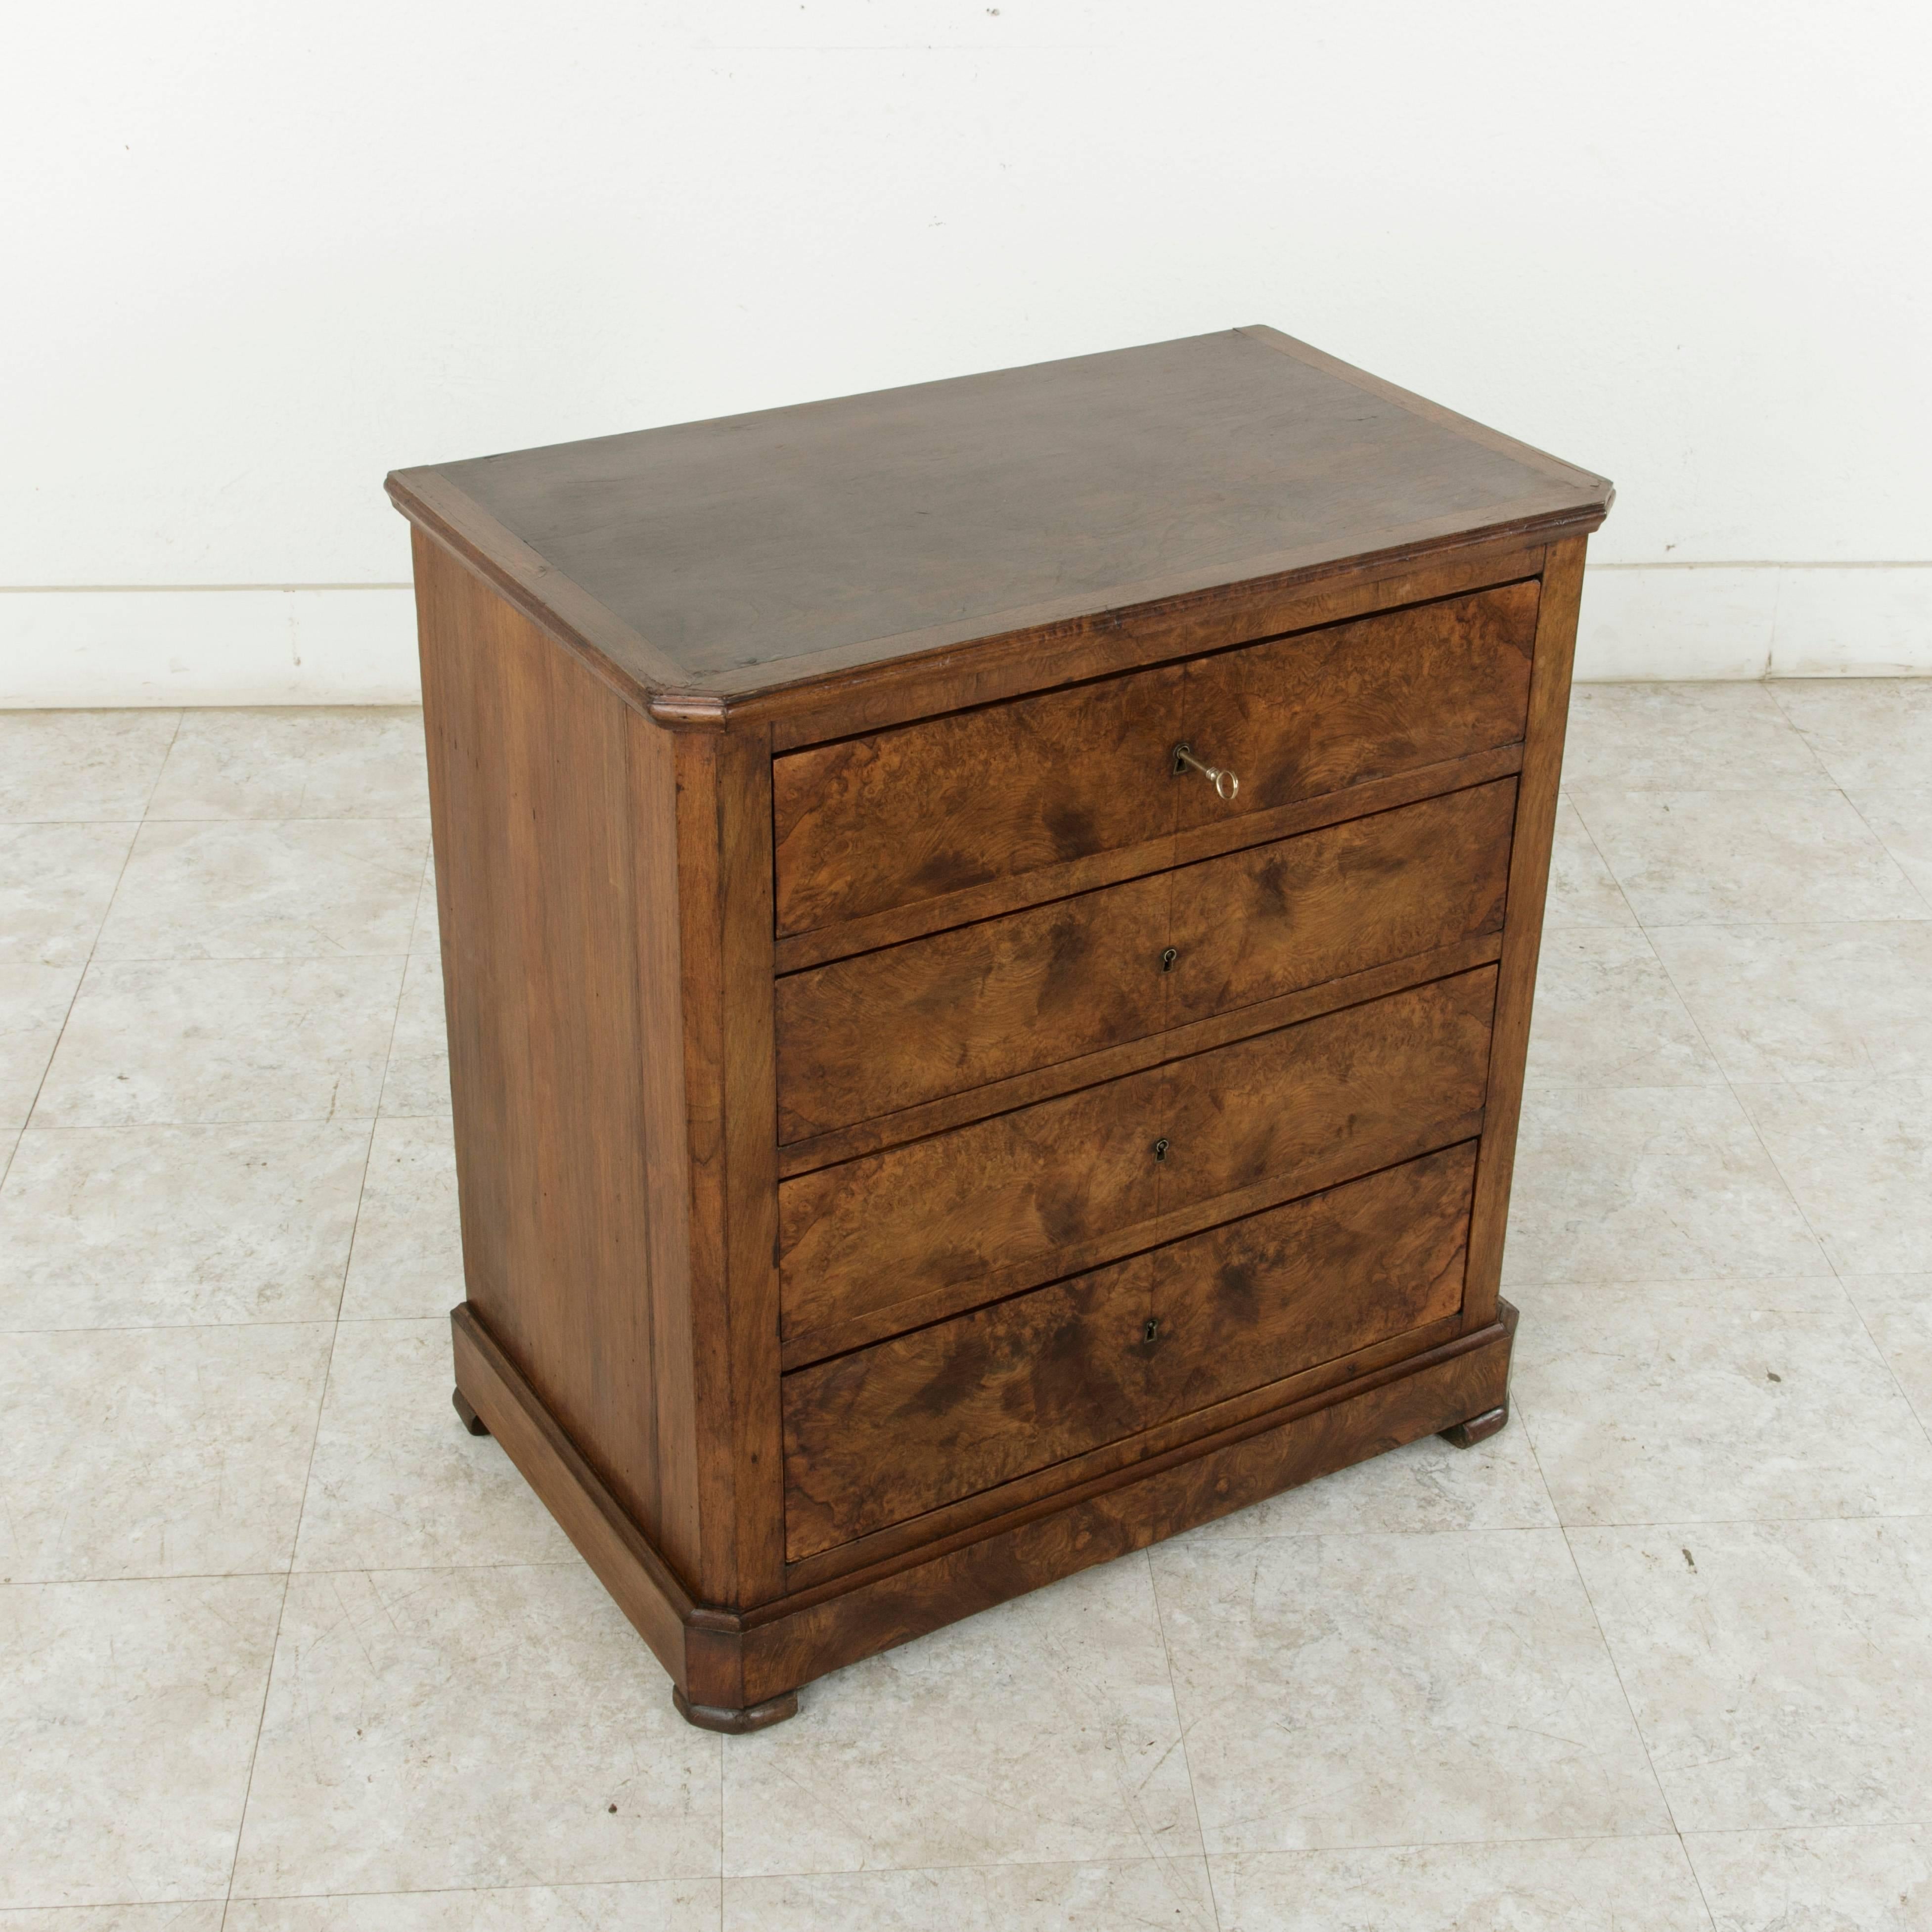 Very rare for its small-scale, this 19th century Louis Philippe chest features walnut sides and top, and a bookmatched walnut facade with four locking drawers of dovetail construction. With its warm wood tones and simple lines, this handsome piece